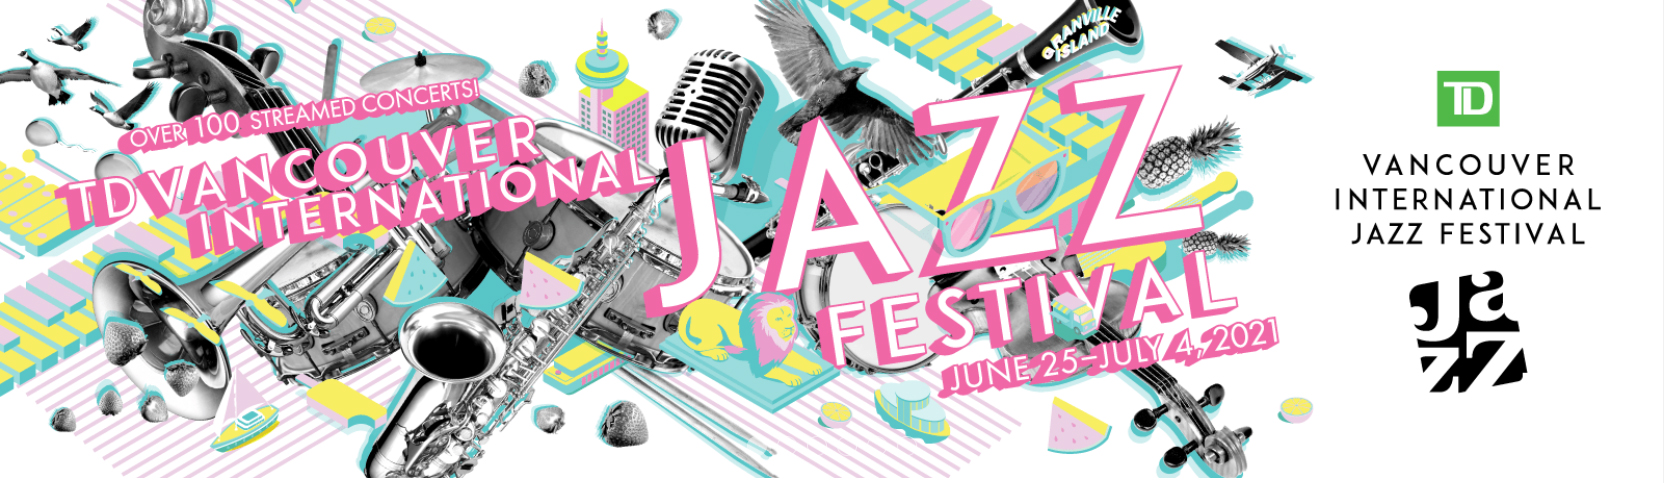 35th Annual TD Vancouver International Jazz Festival Announces Free  Streamed Concerts, Workshops, and Annual Colloquium - Inside Vancouver  BlogInside Vancouver Blog